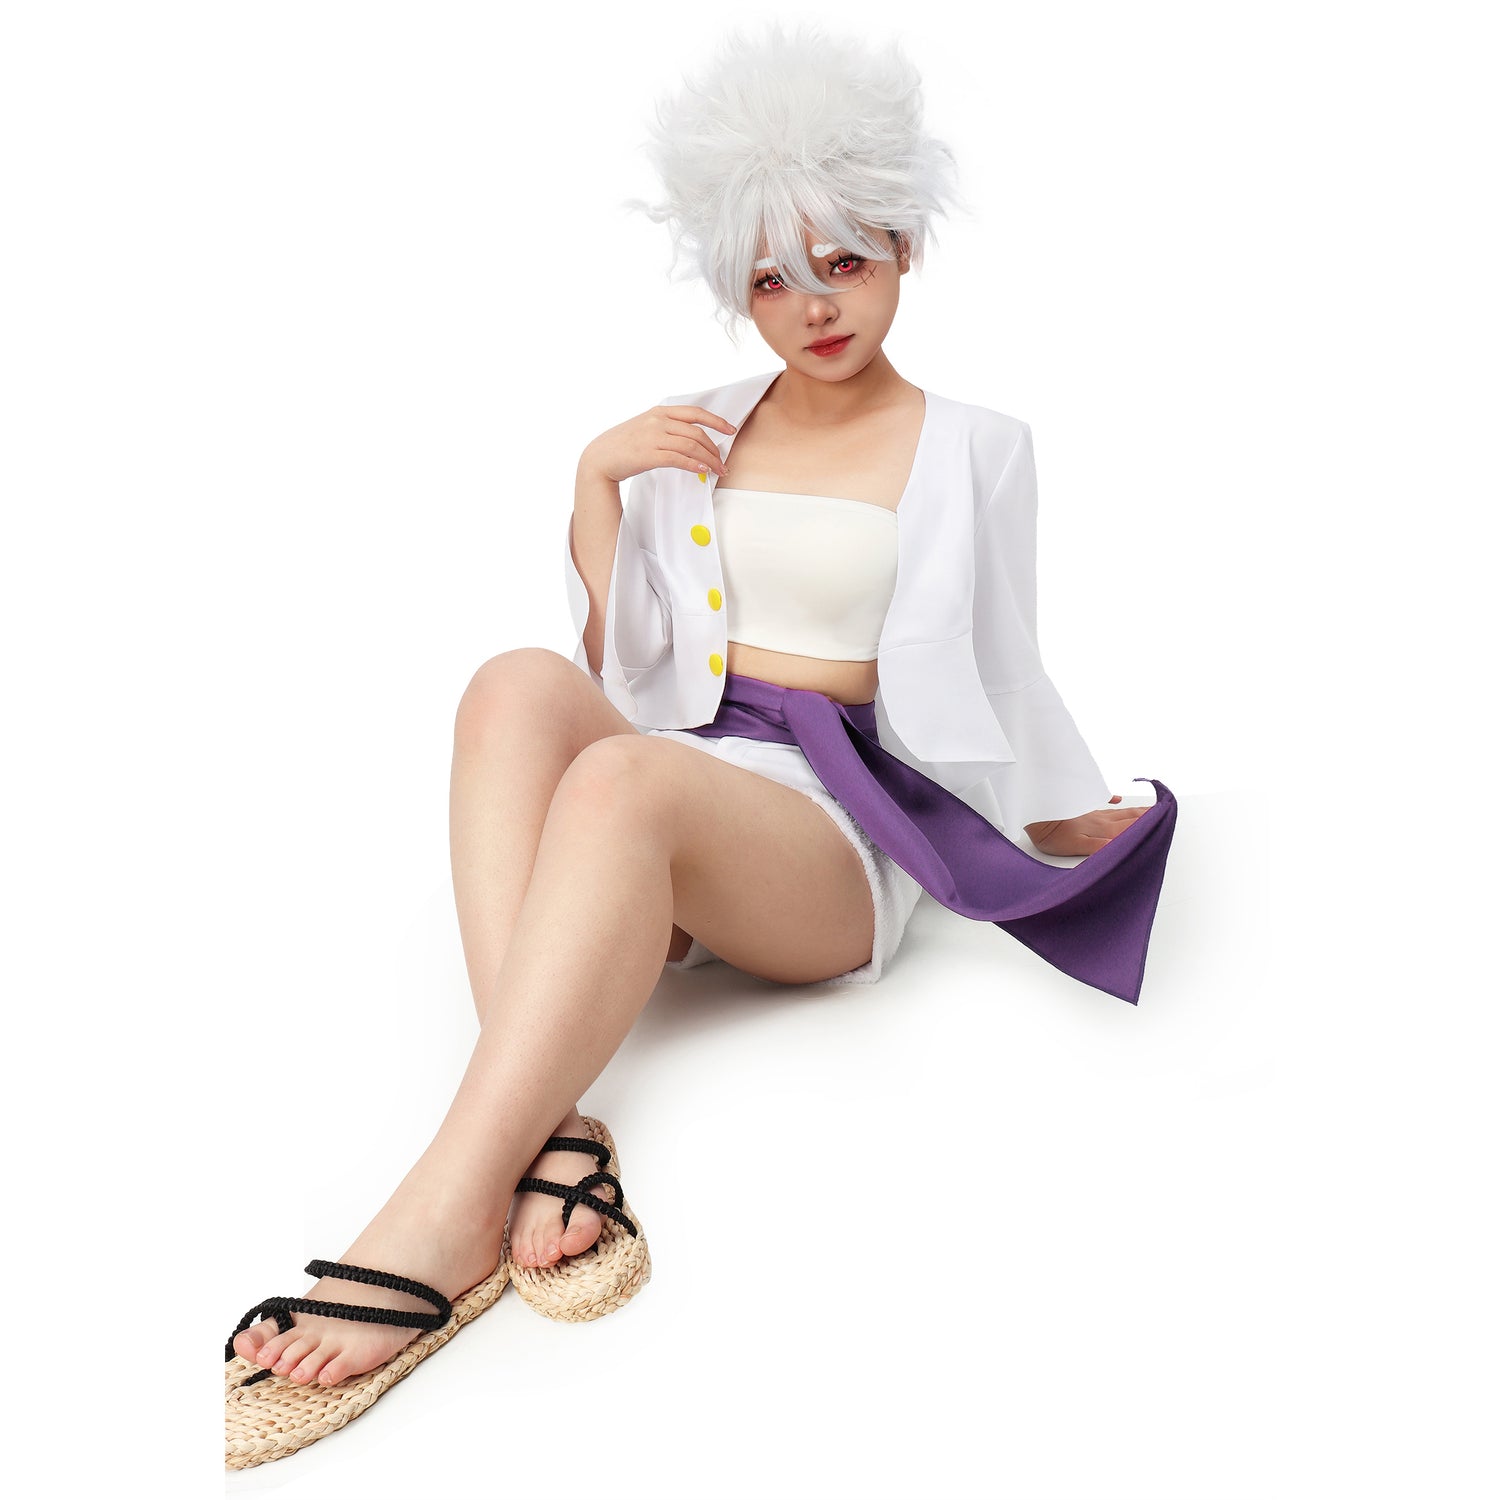 DAZCOS Luffy Gear 5 Female Version Cosplay Costume Outfit White Shirt Pants and Purple Sash